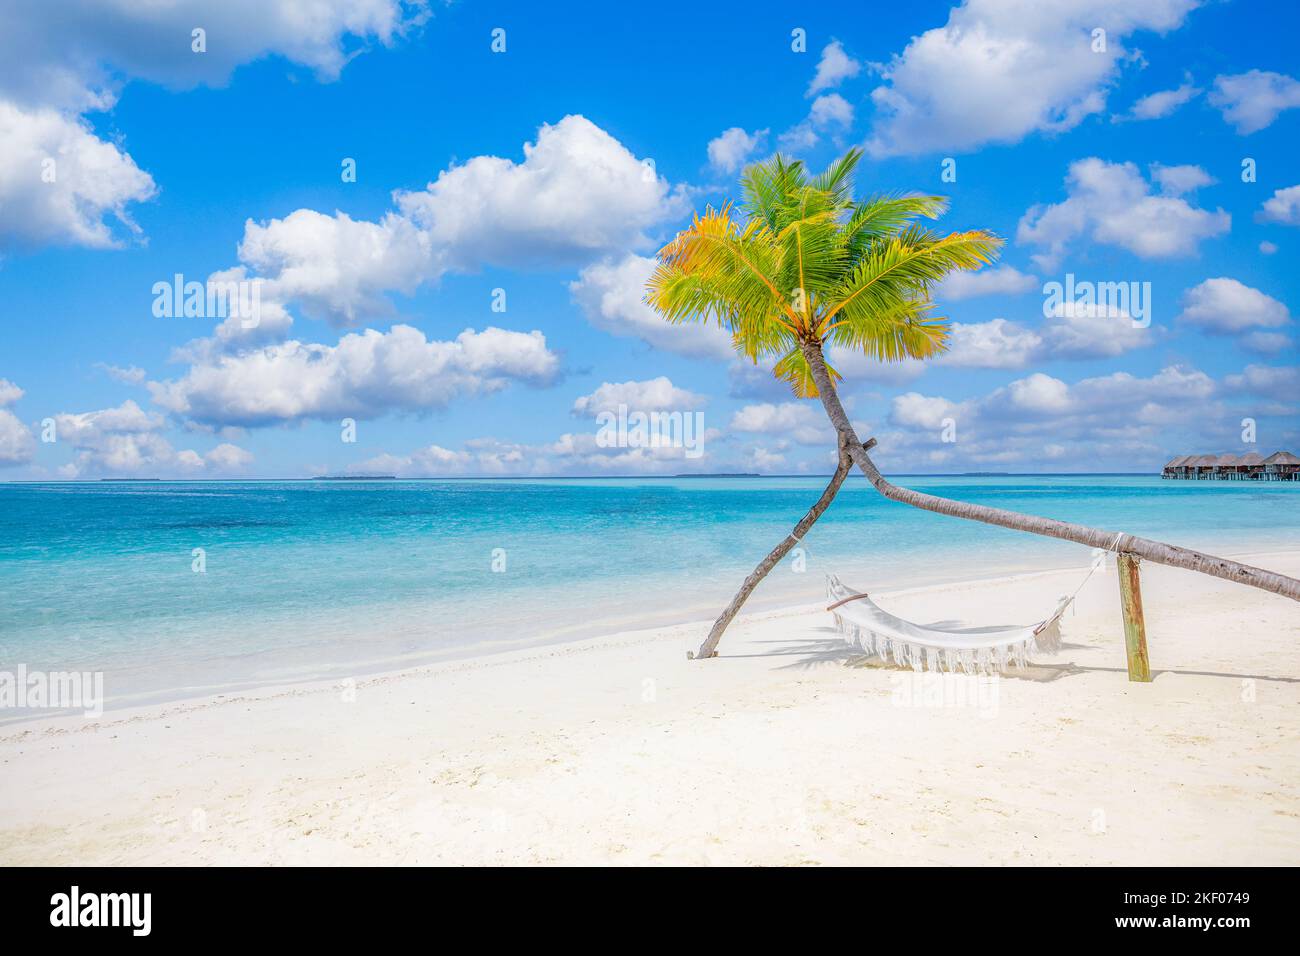 Scenic tropical beach as summer landscape with beach swing or hammock hanging on palm tree over white sand calm seaside view for beach banner Carefree Stock Photo